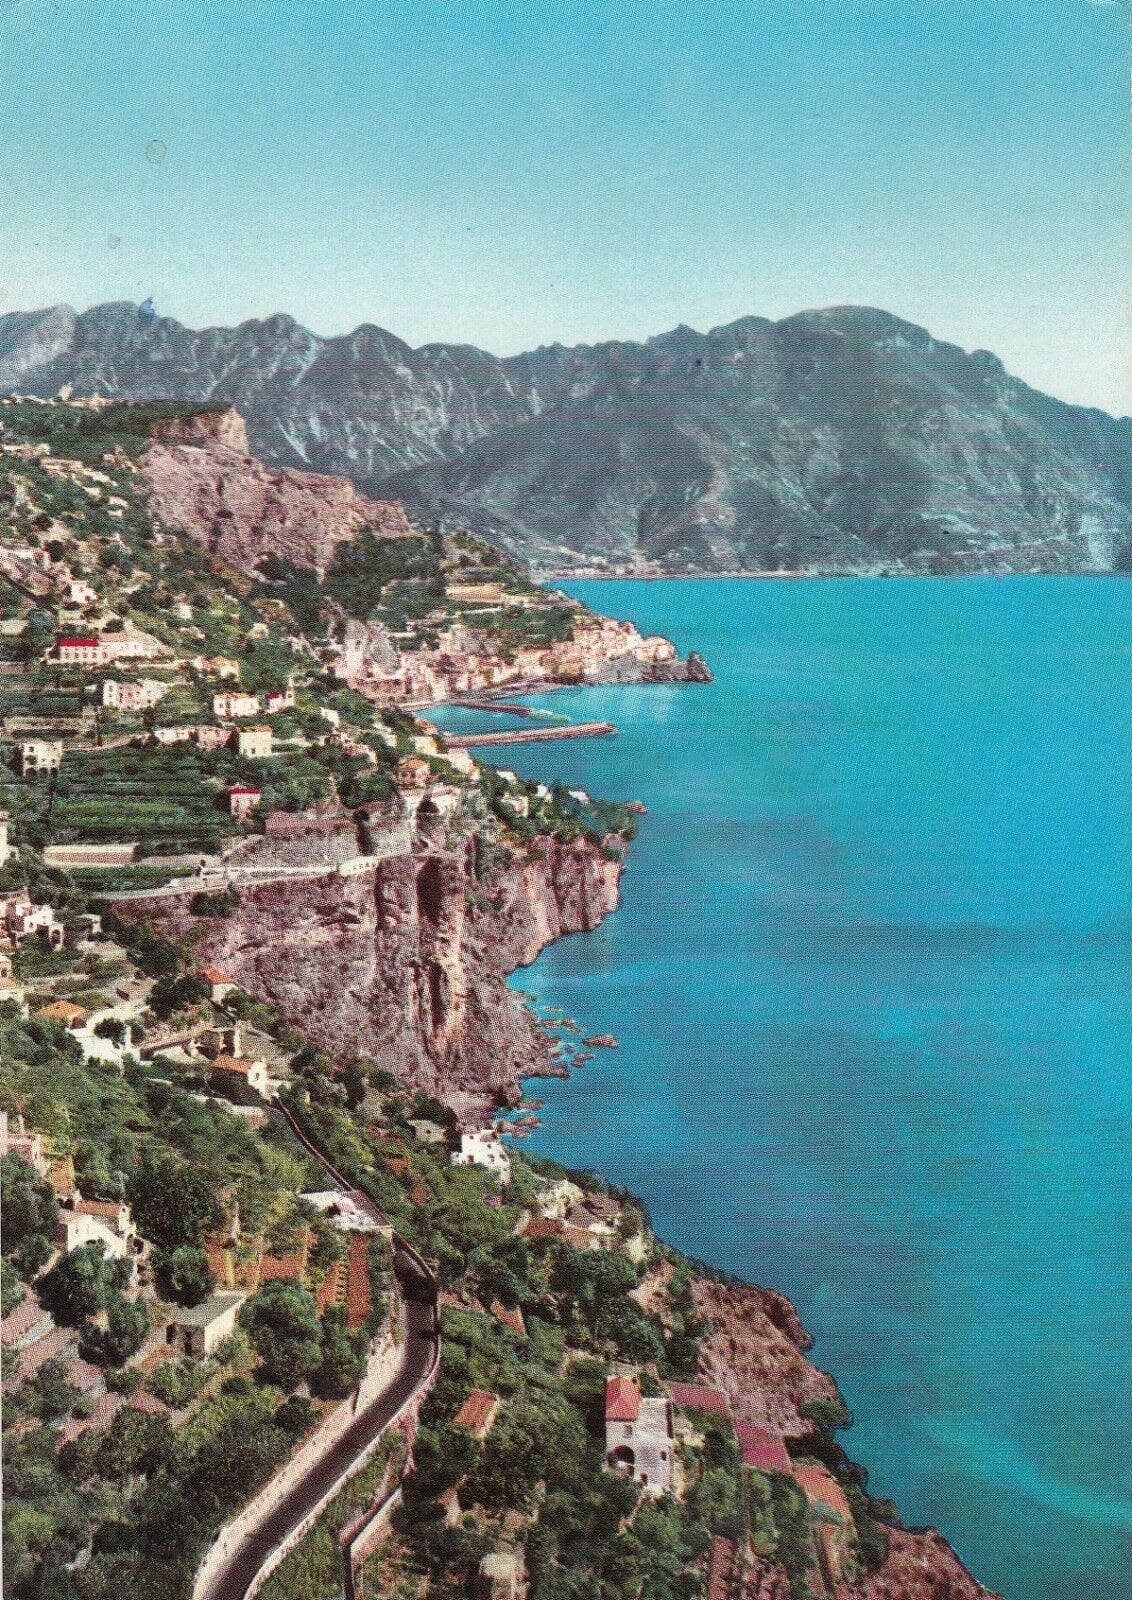 Amalfi's panorama. Roadview. When you're going from Sorrento.